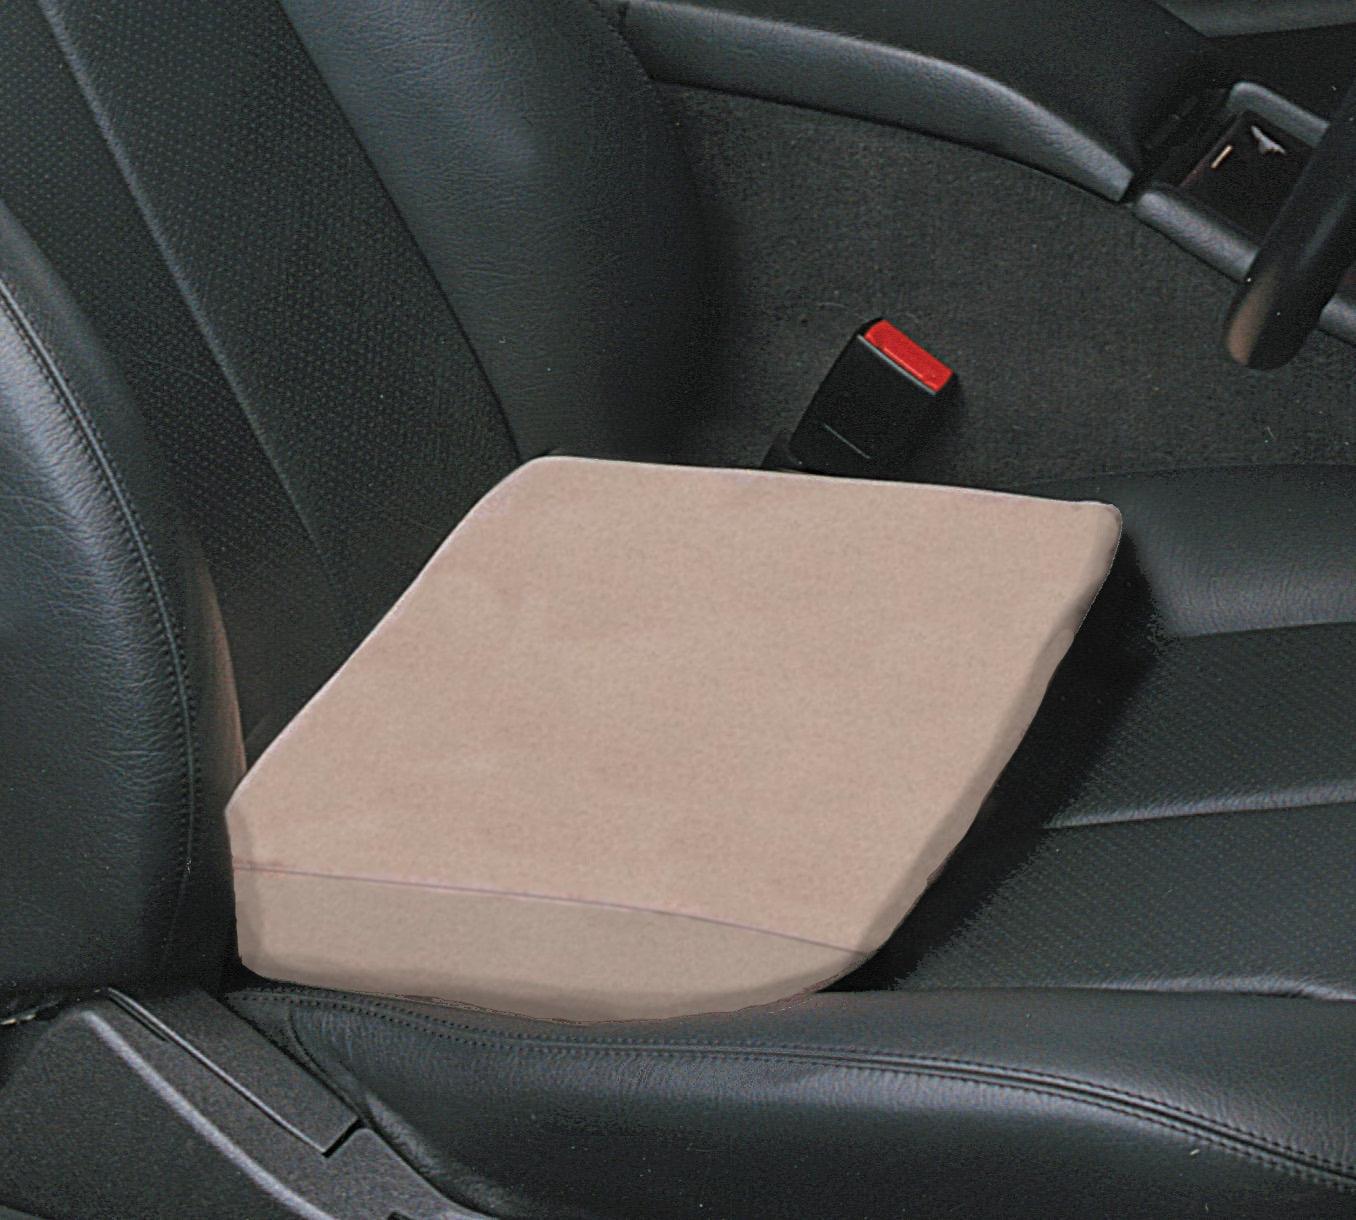 View Car Seat Topper Levels Off Car Seat Cushion Beige information